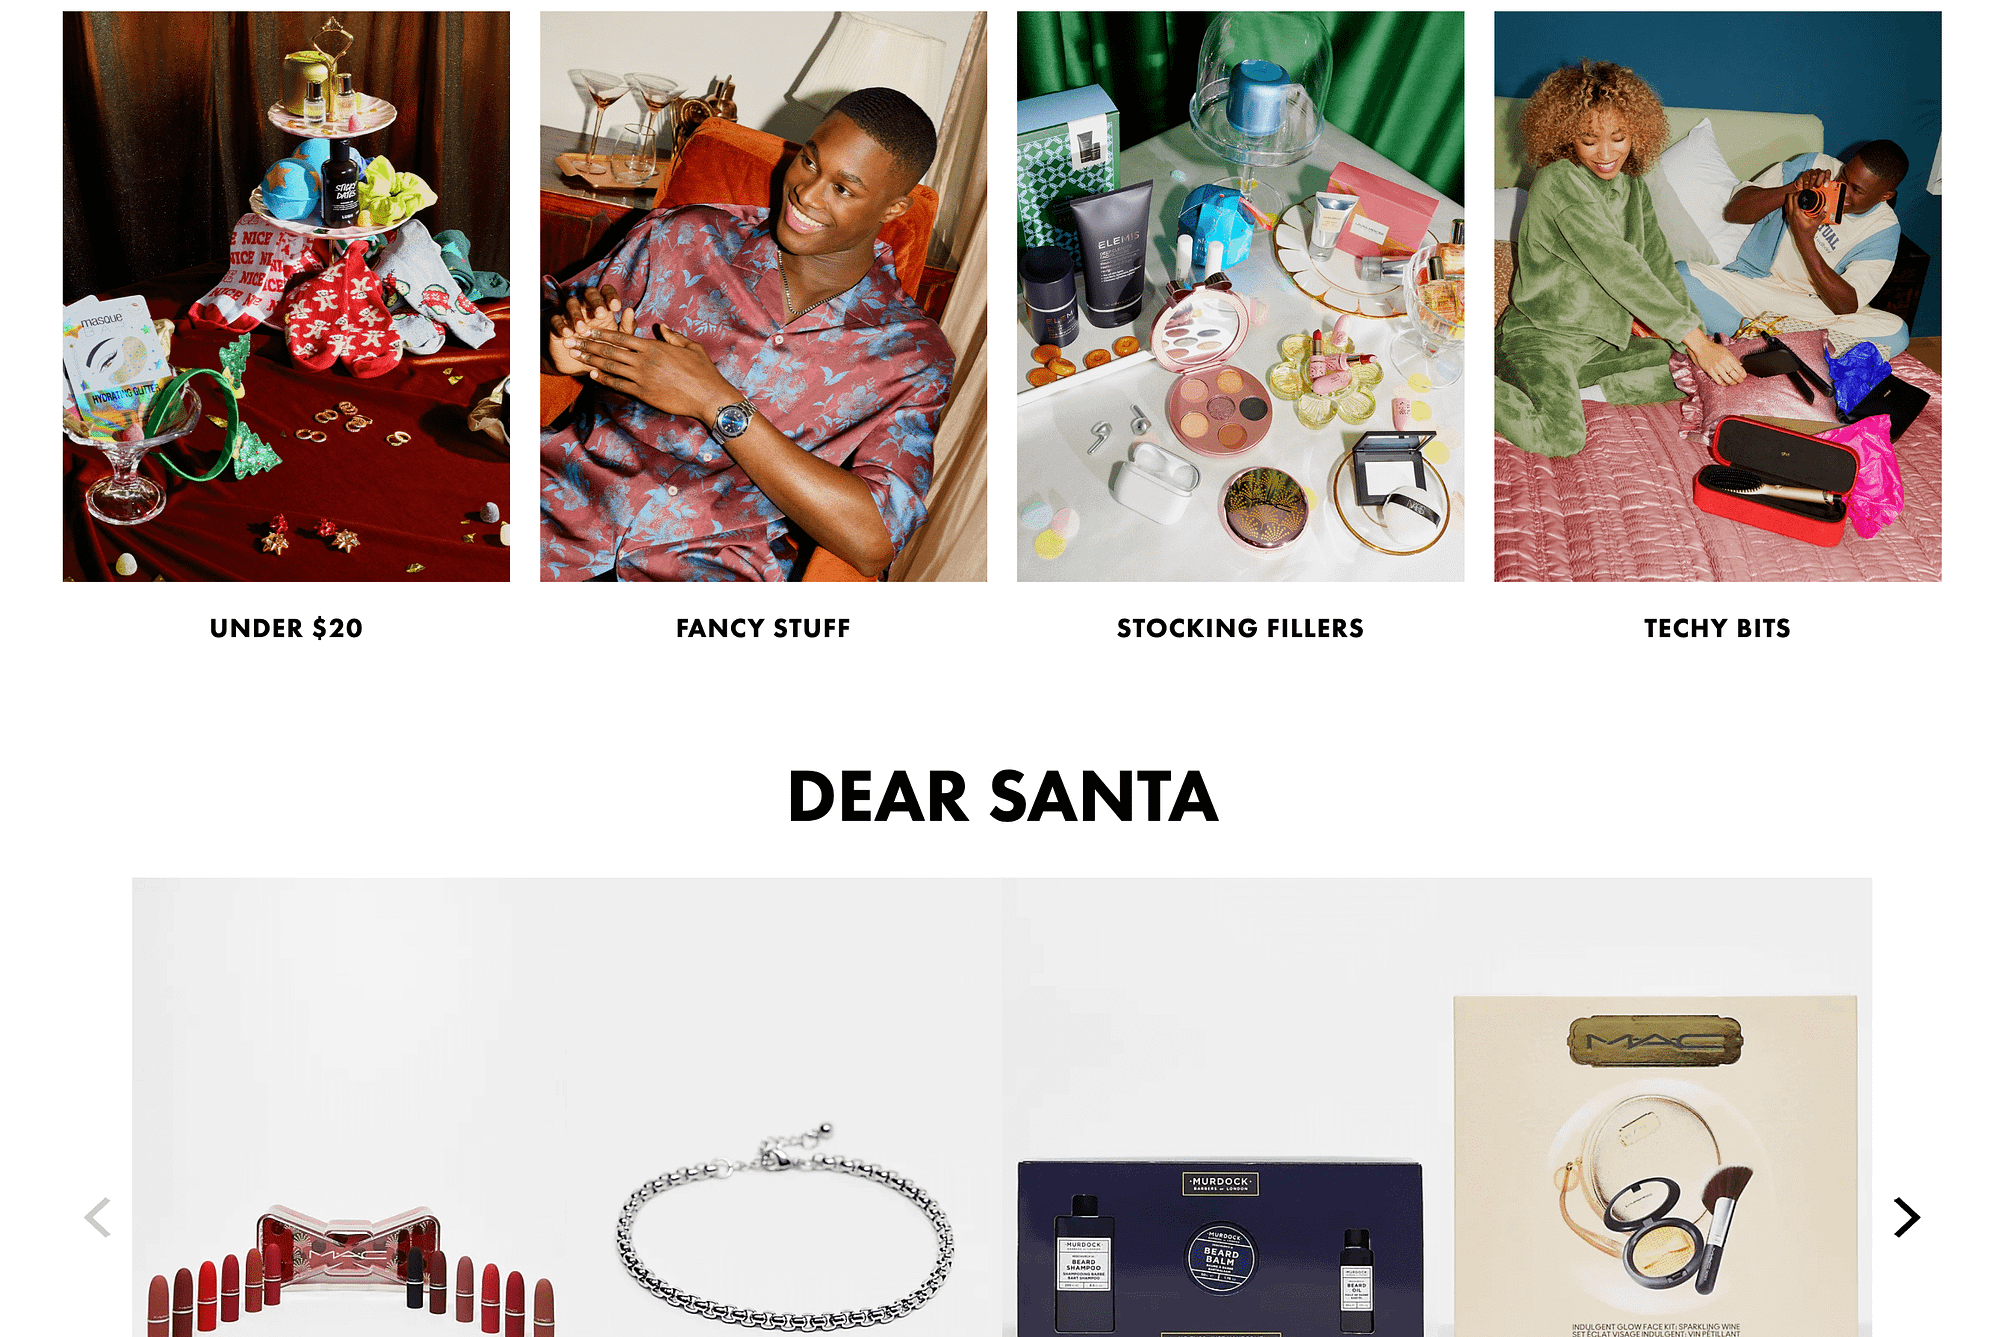 A gift guide featuring creative categories like "fancy stuff" and "stocking fillers".